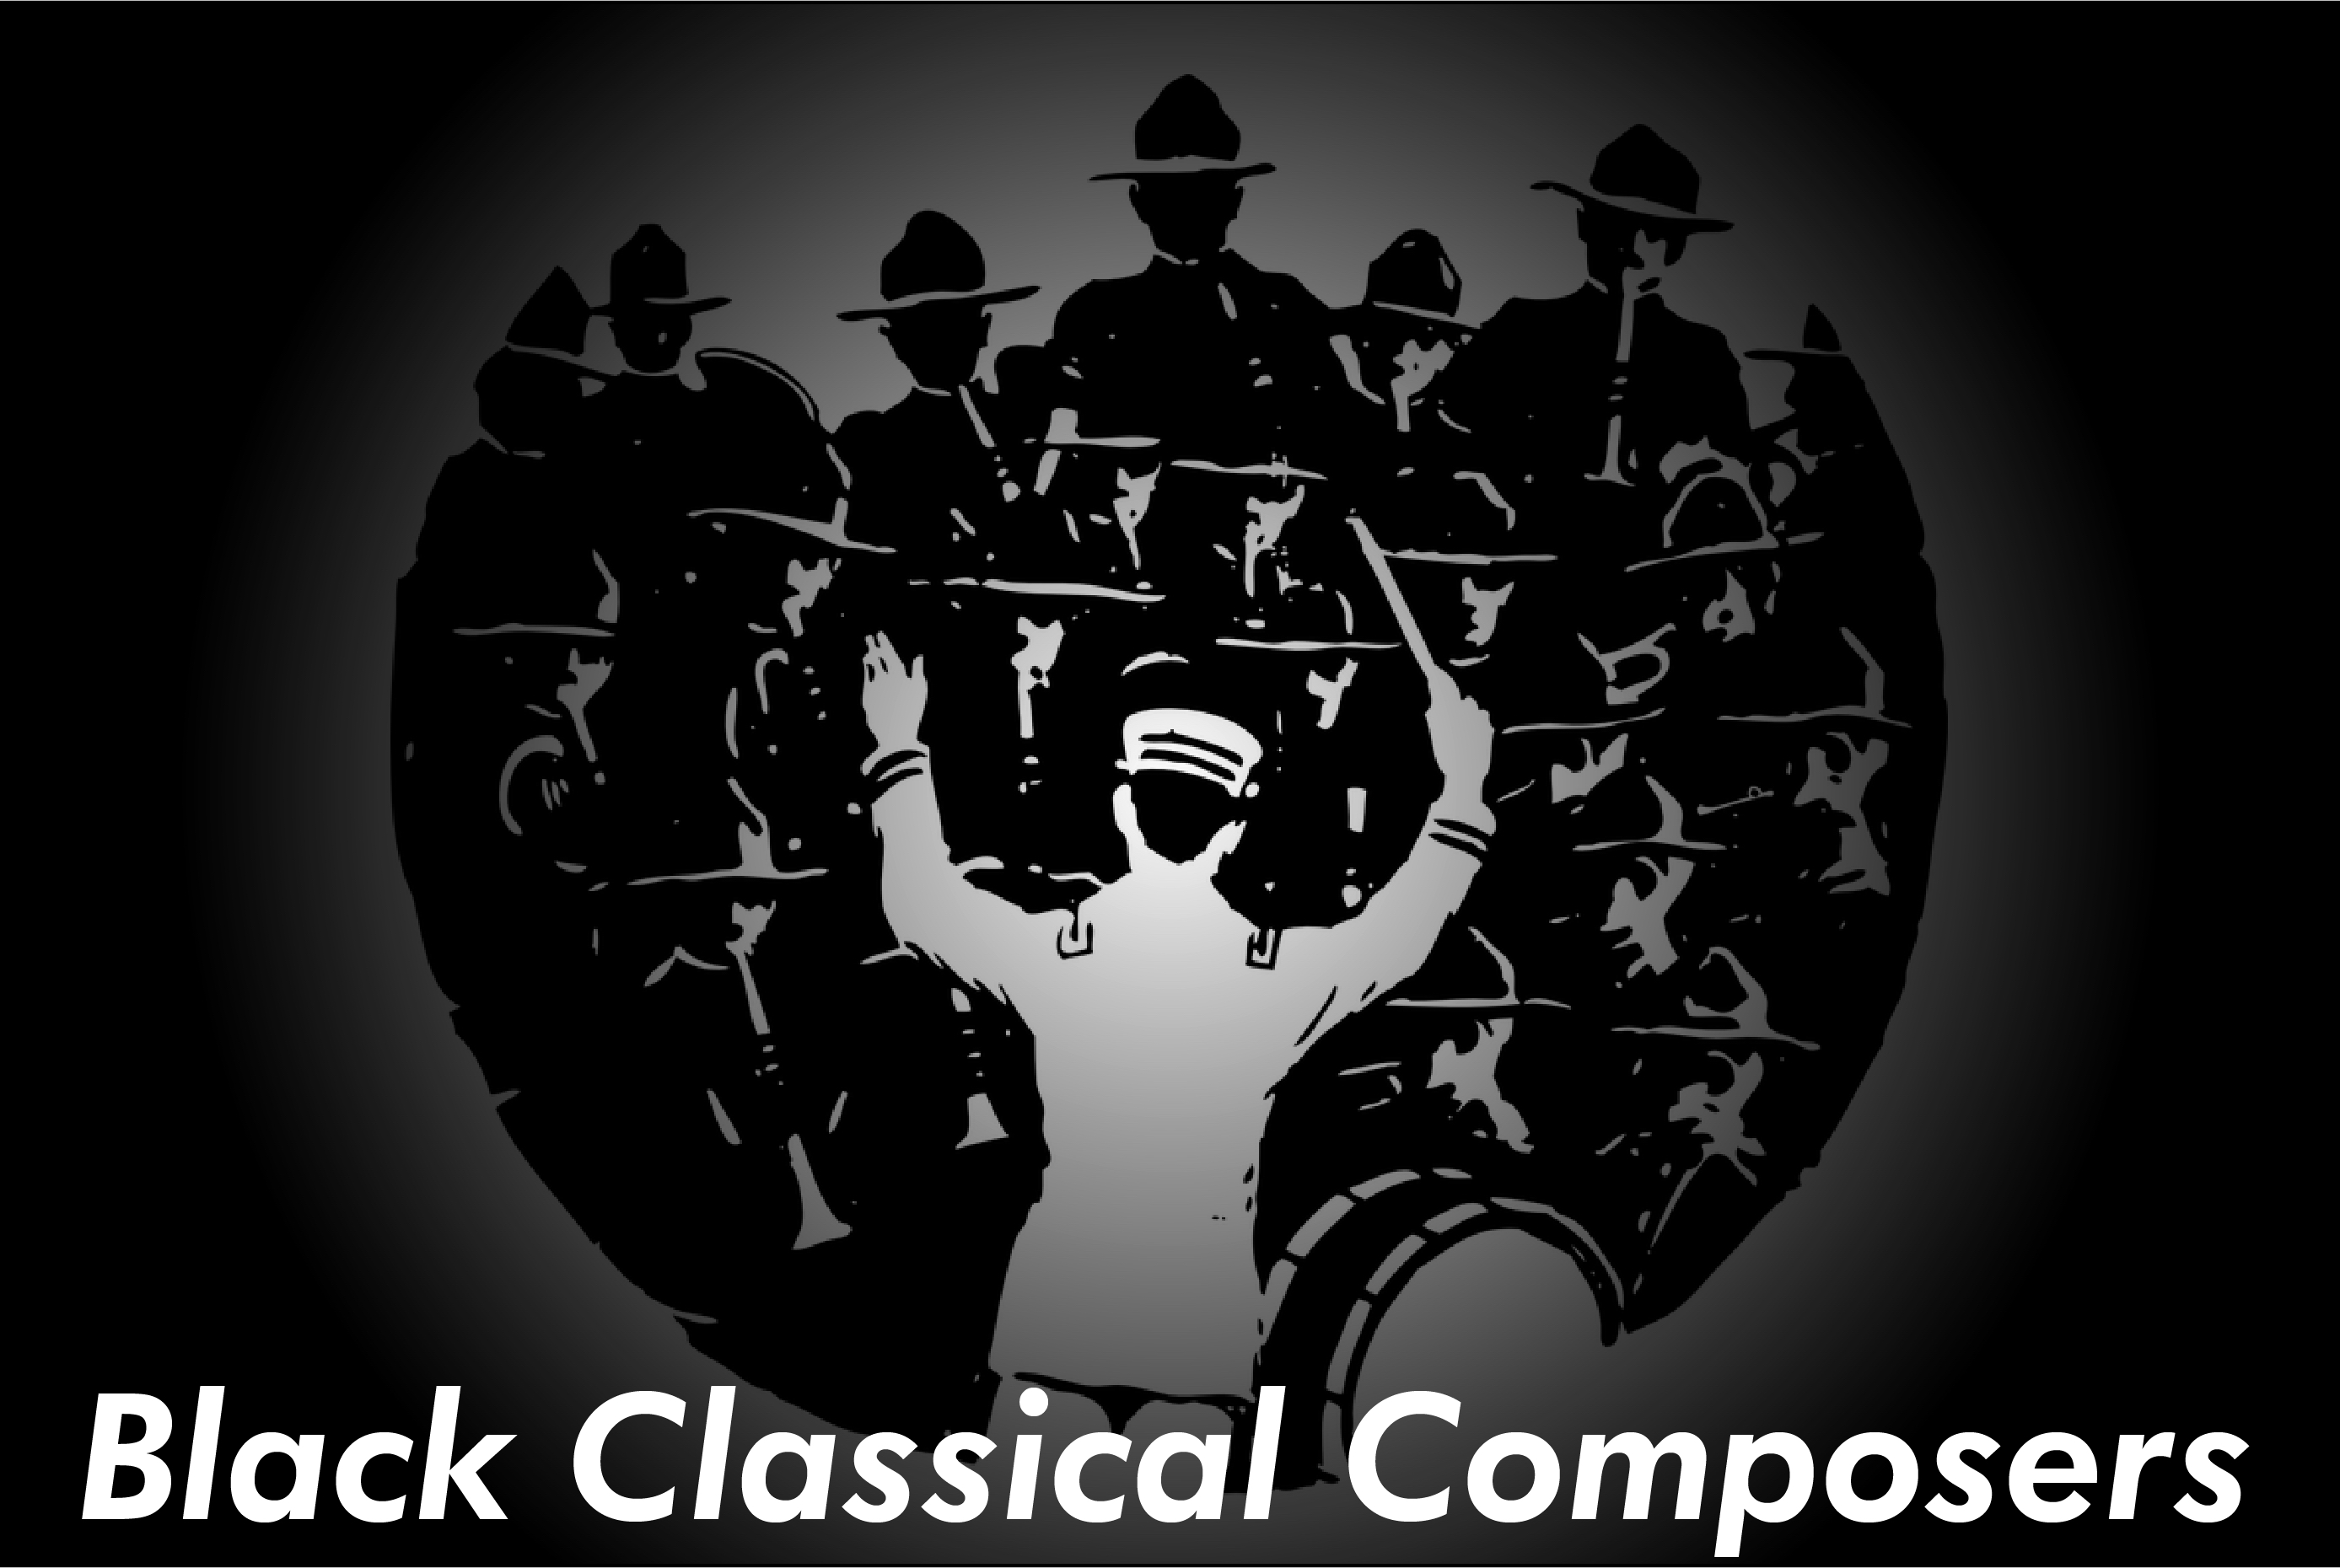 Black Classical Composers and their Integration into Elementary School General Music Curricula